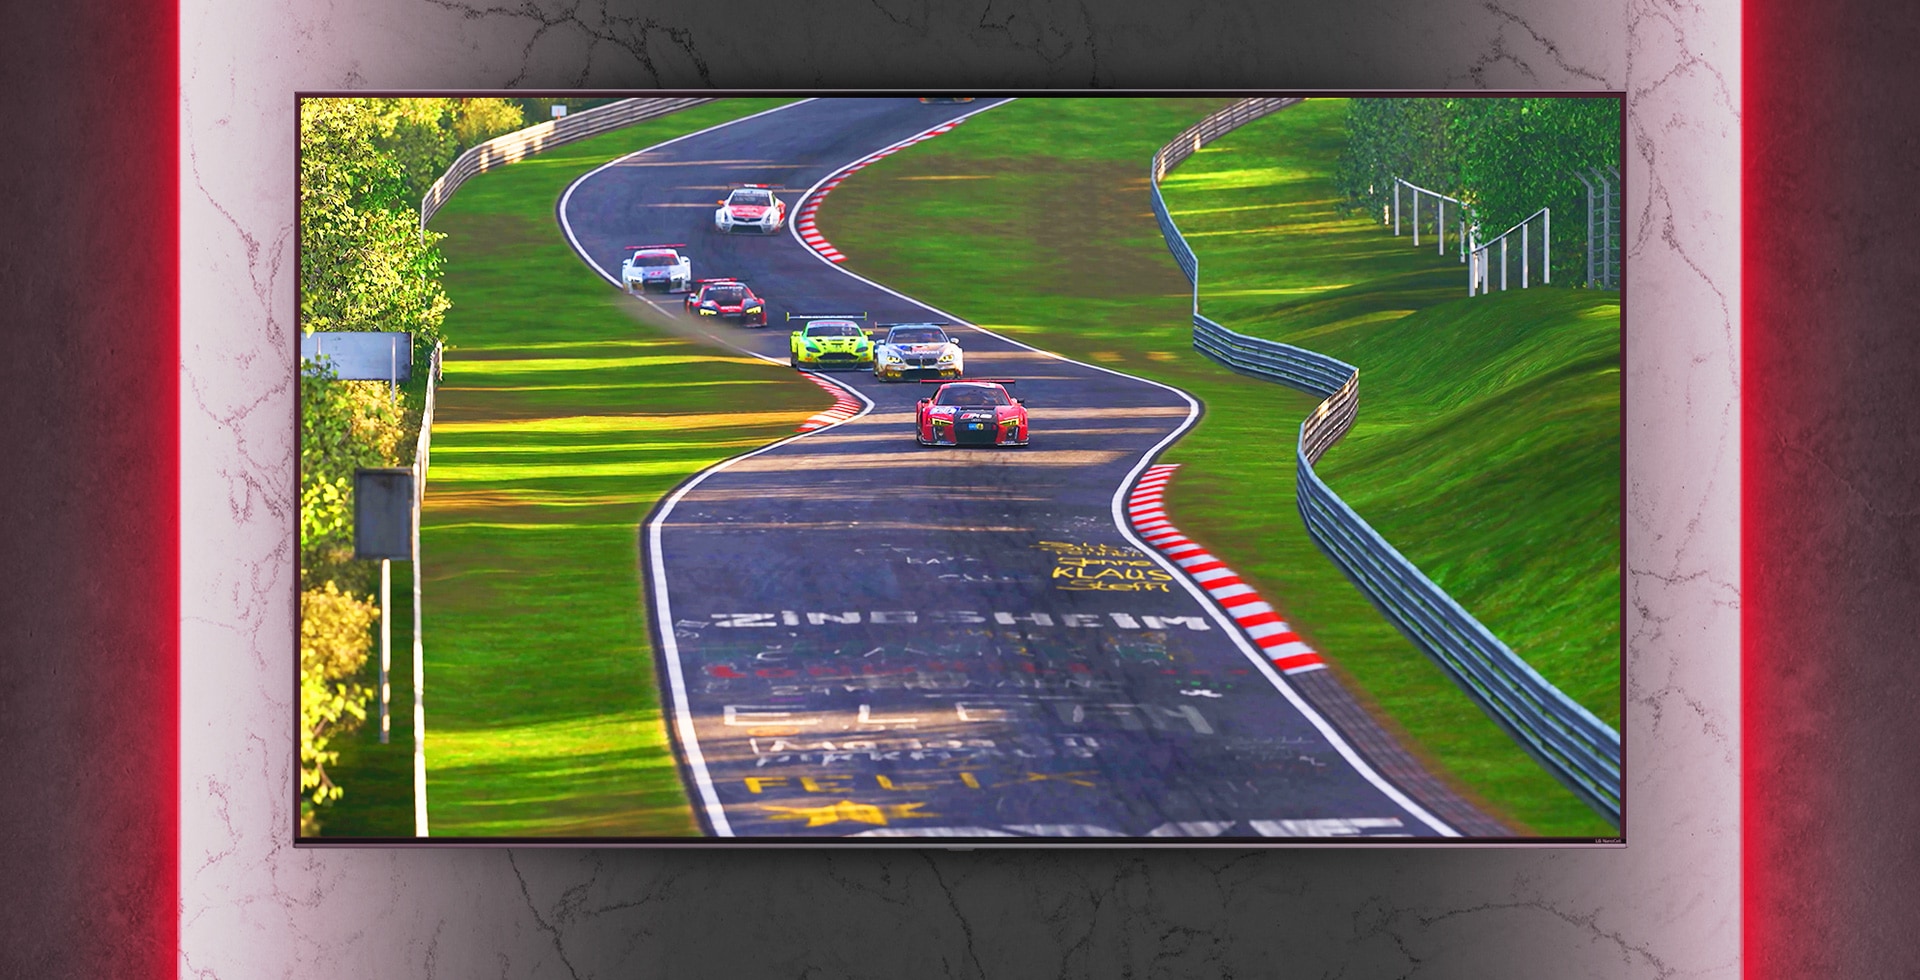 Wall mounted NanoCell TV. The racing game is played. Below that, the improved image quality is seen through Nanocell technology.